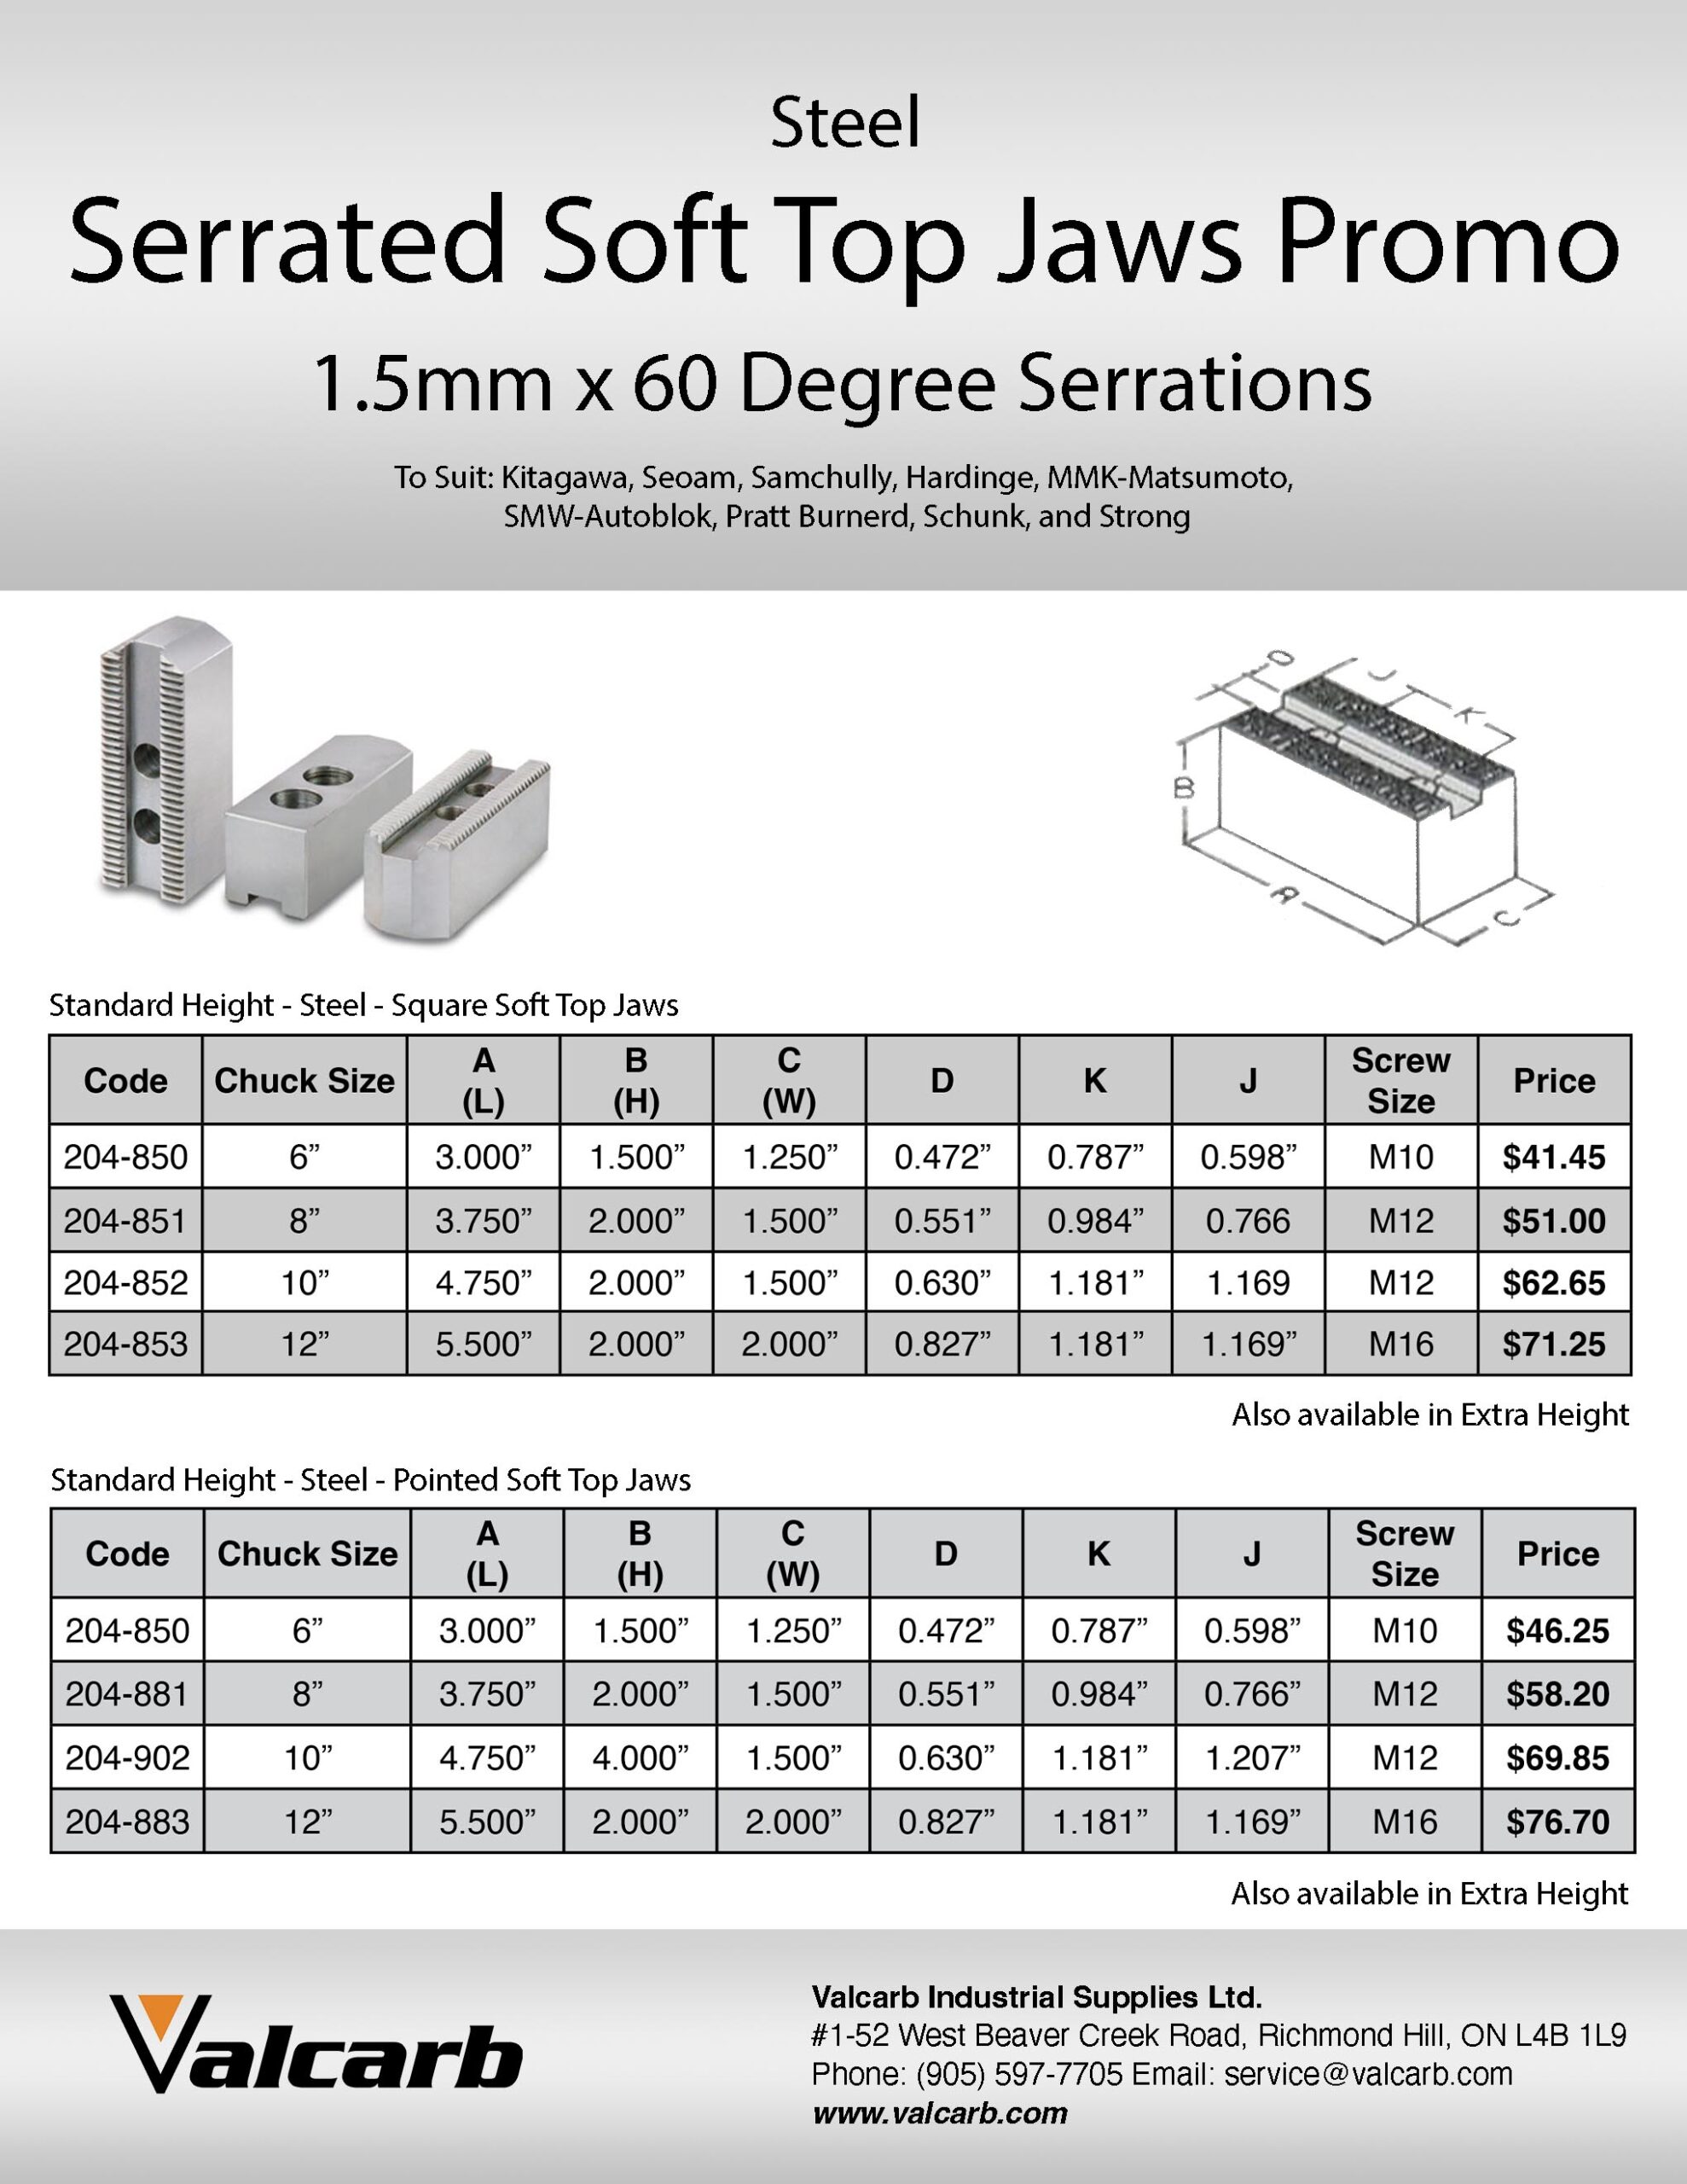 Steel Serrated Soft Top Jaws Promo!